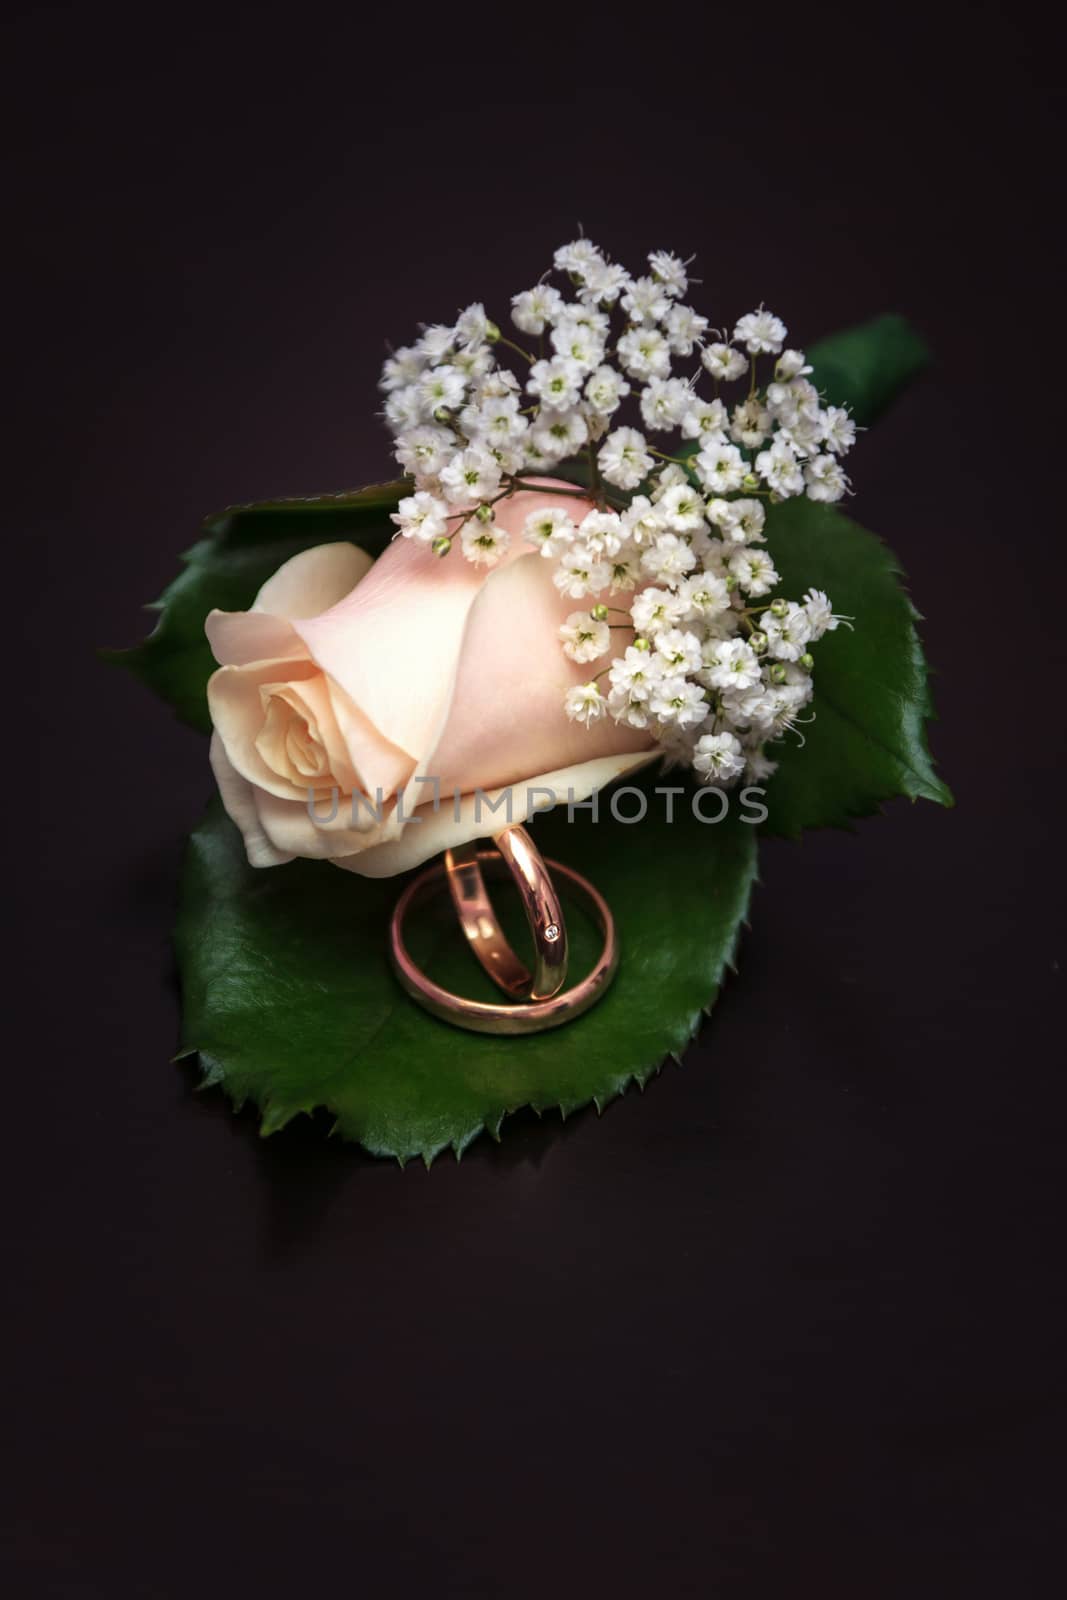 Wedding rings and pibk boutonniere lie on the brown background